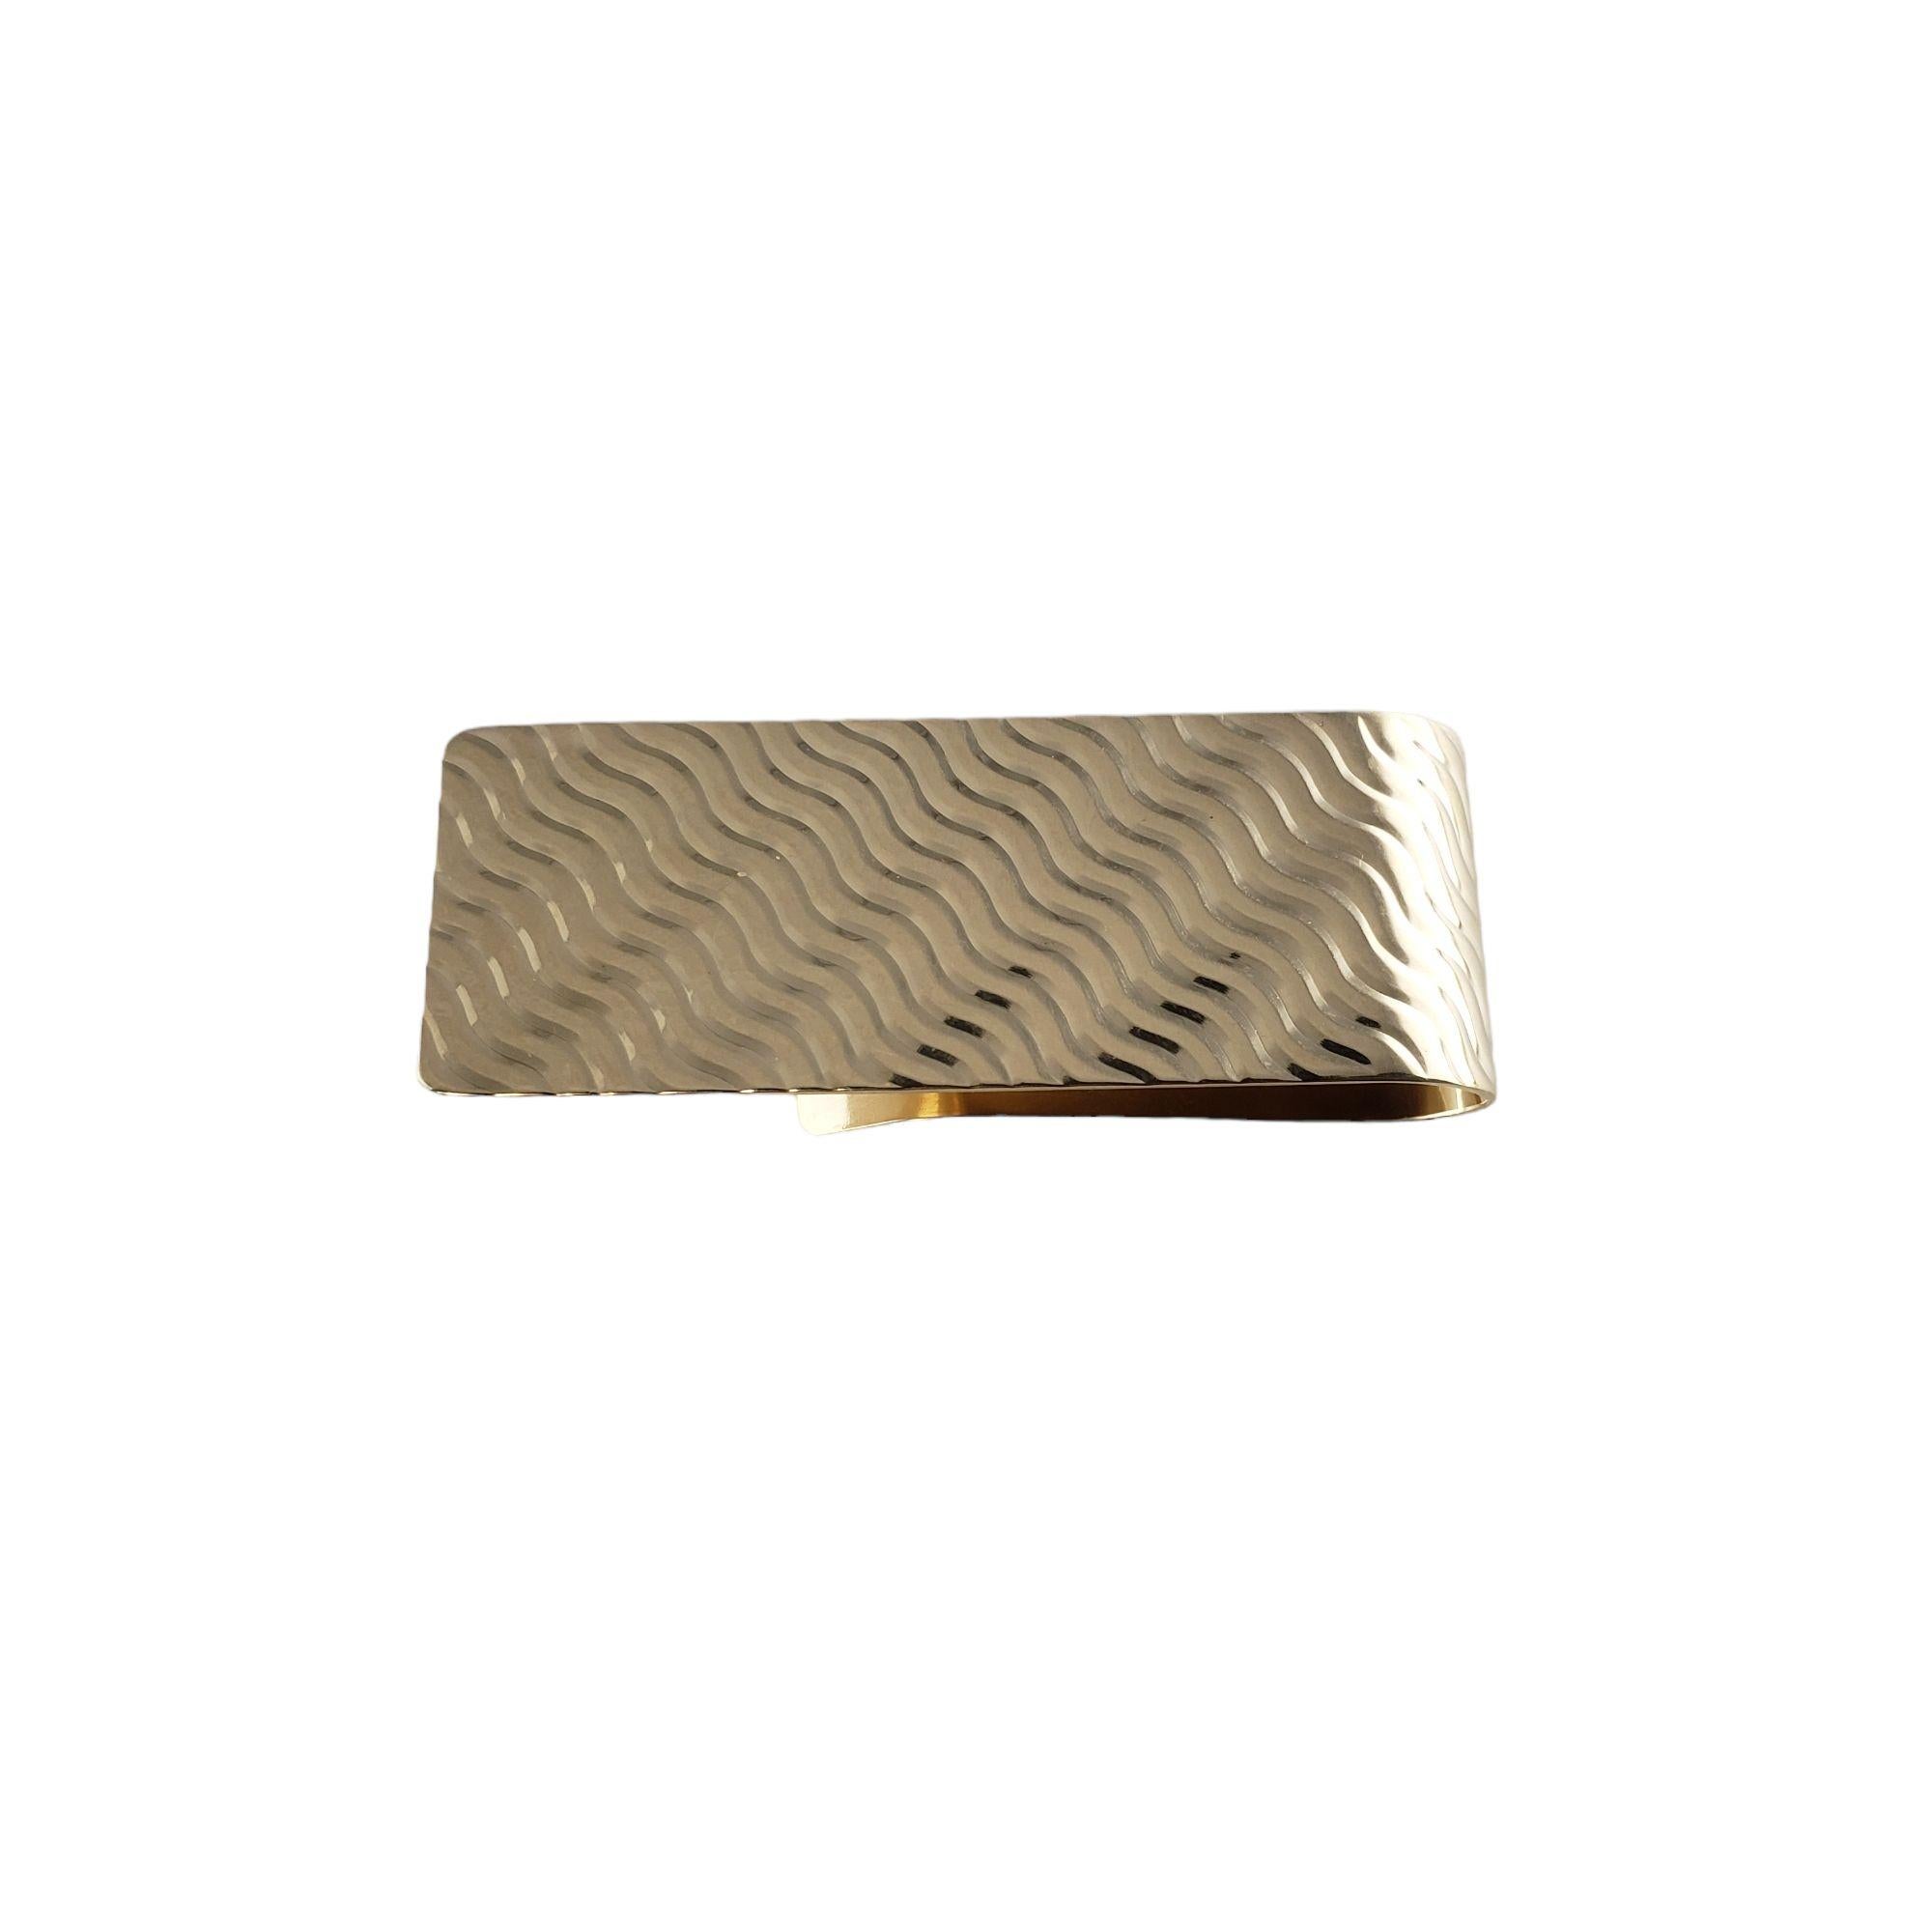 Cartier 14 Karat Yellow Gold Money Clip #13544 In Good Condition For Sale In Washington Depot, CT